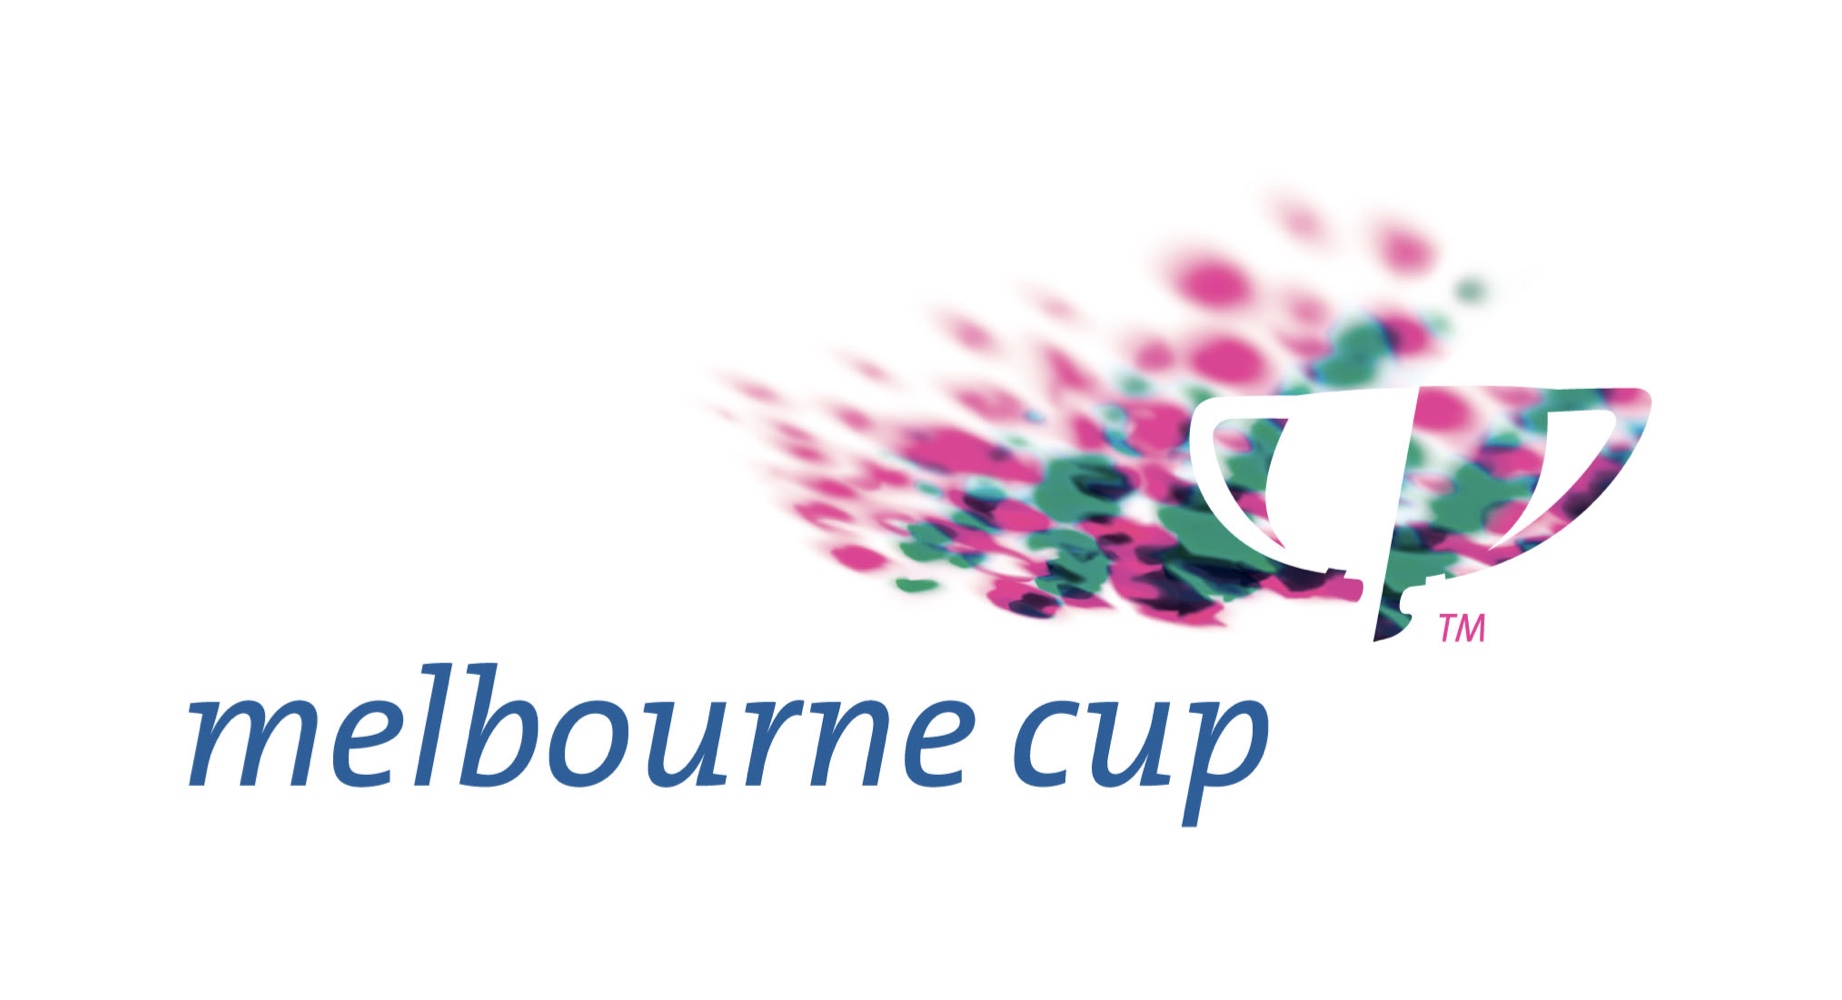 Melbourne cup 2022 betting options mb24 betting tips